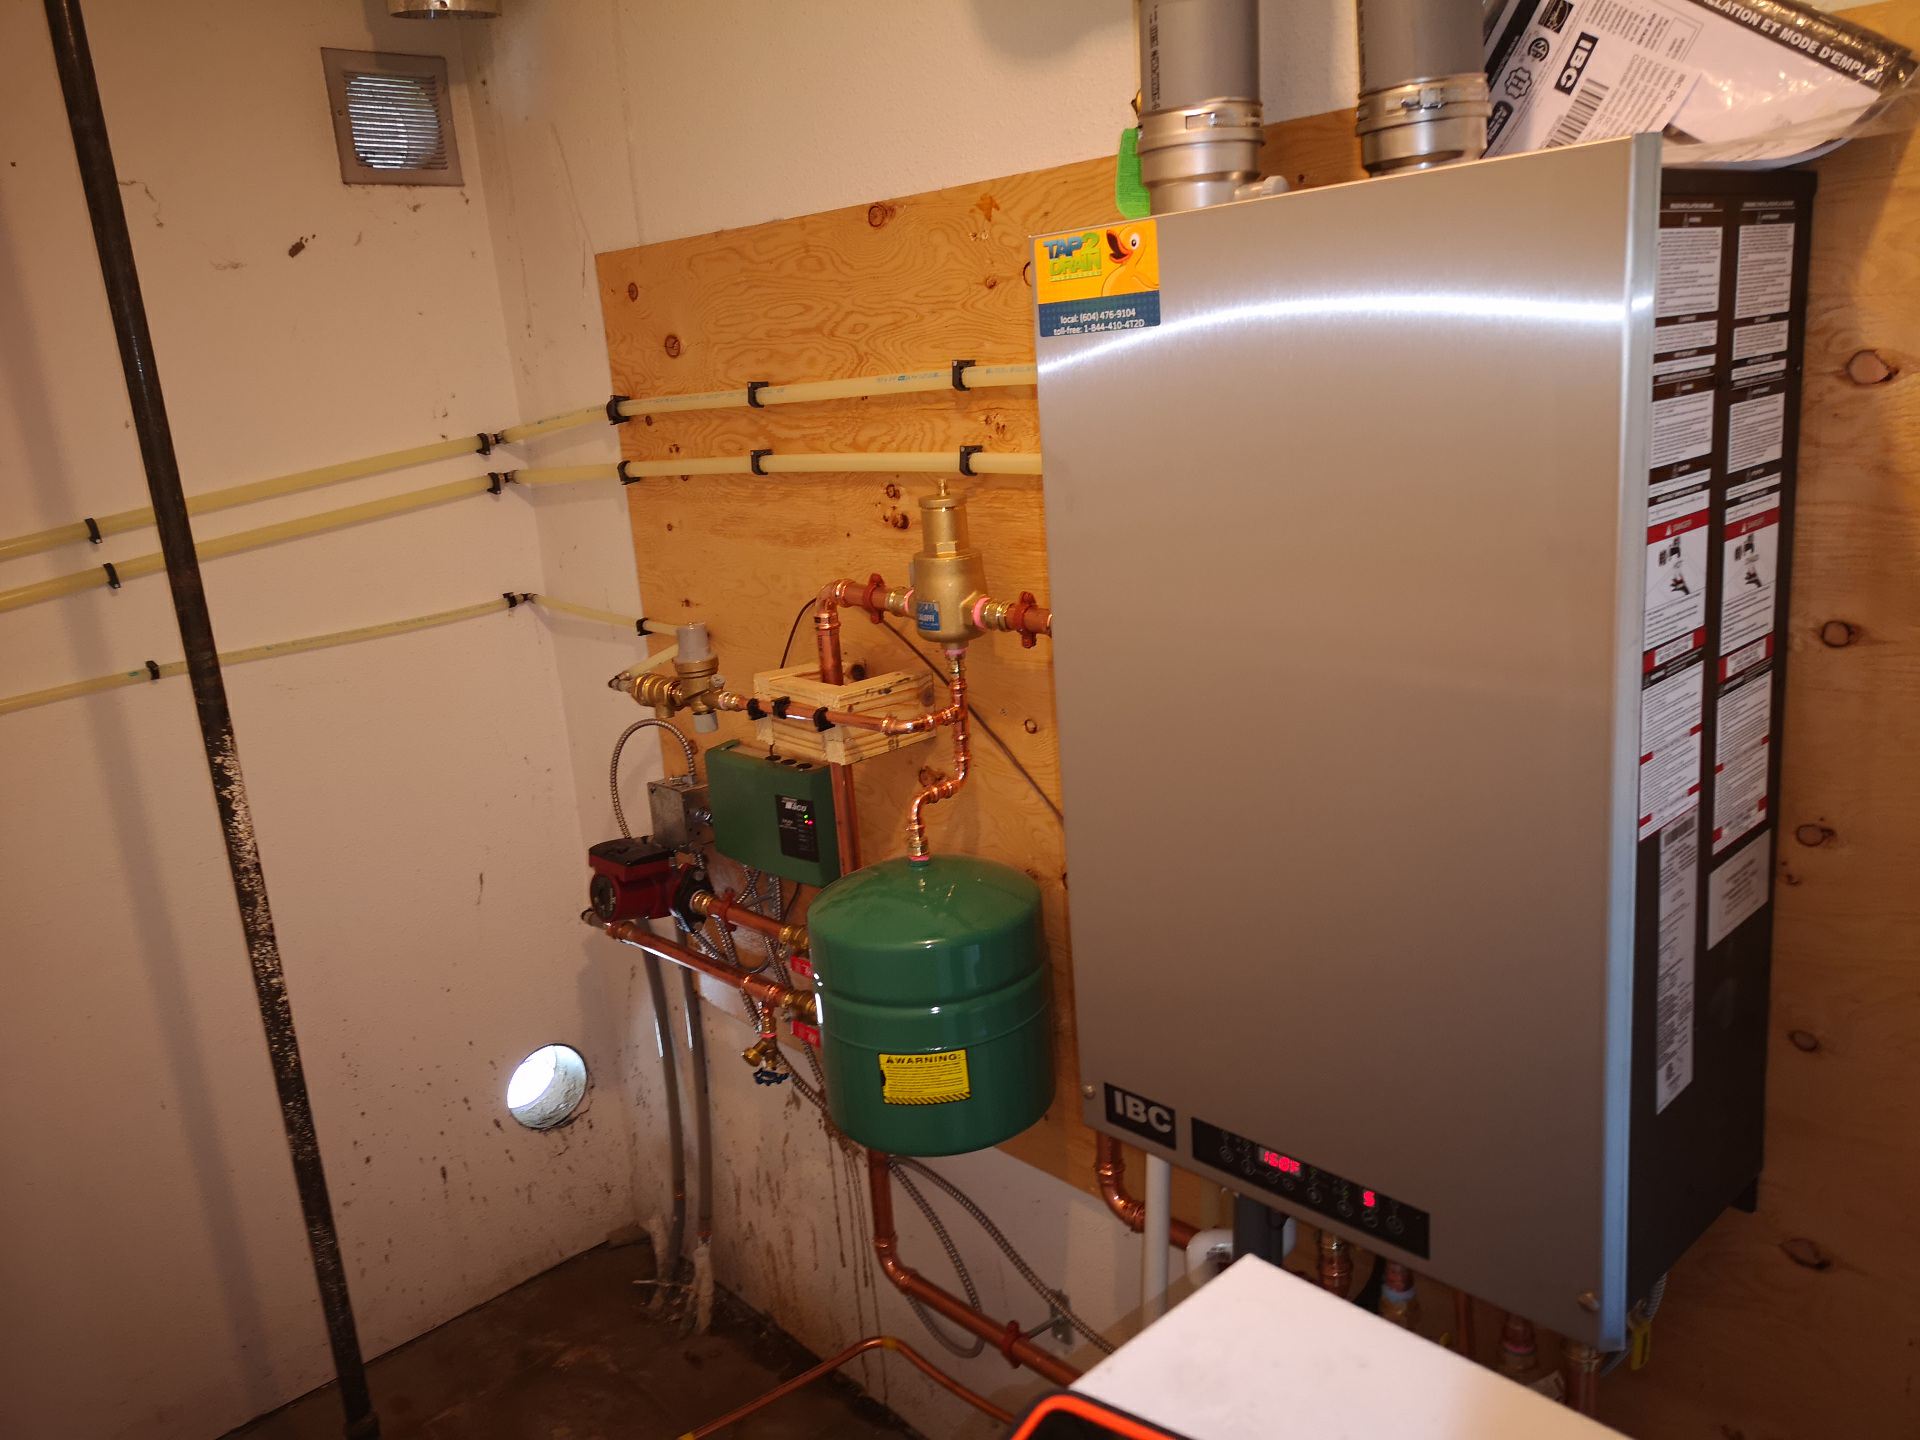 Boiler System is installed in a room - Tap2Drain Plumbing Services